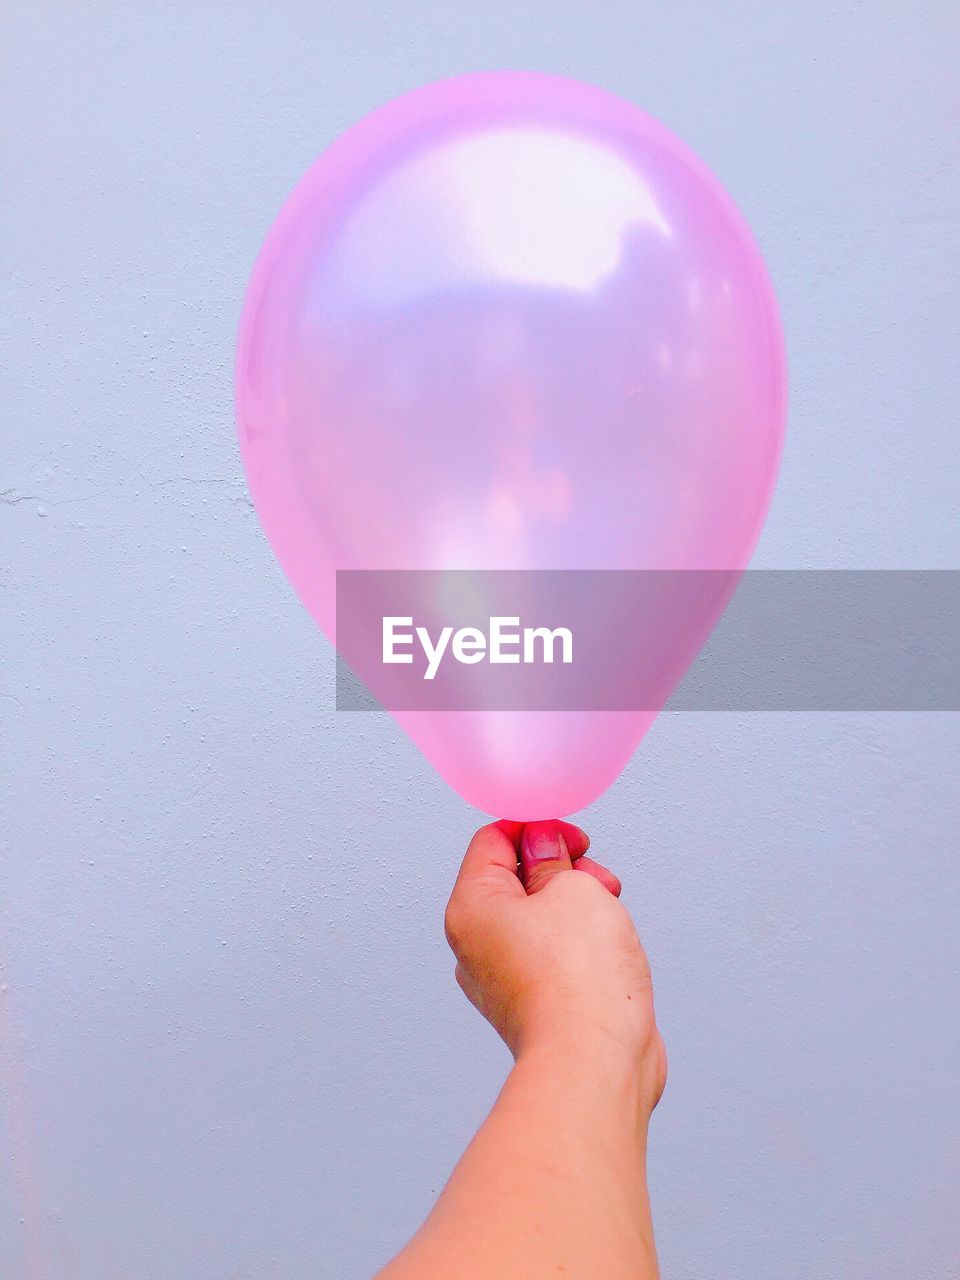 Cropped image of hand holding pink balloon against wall